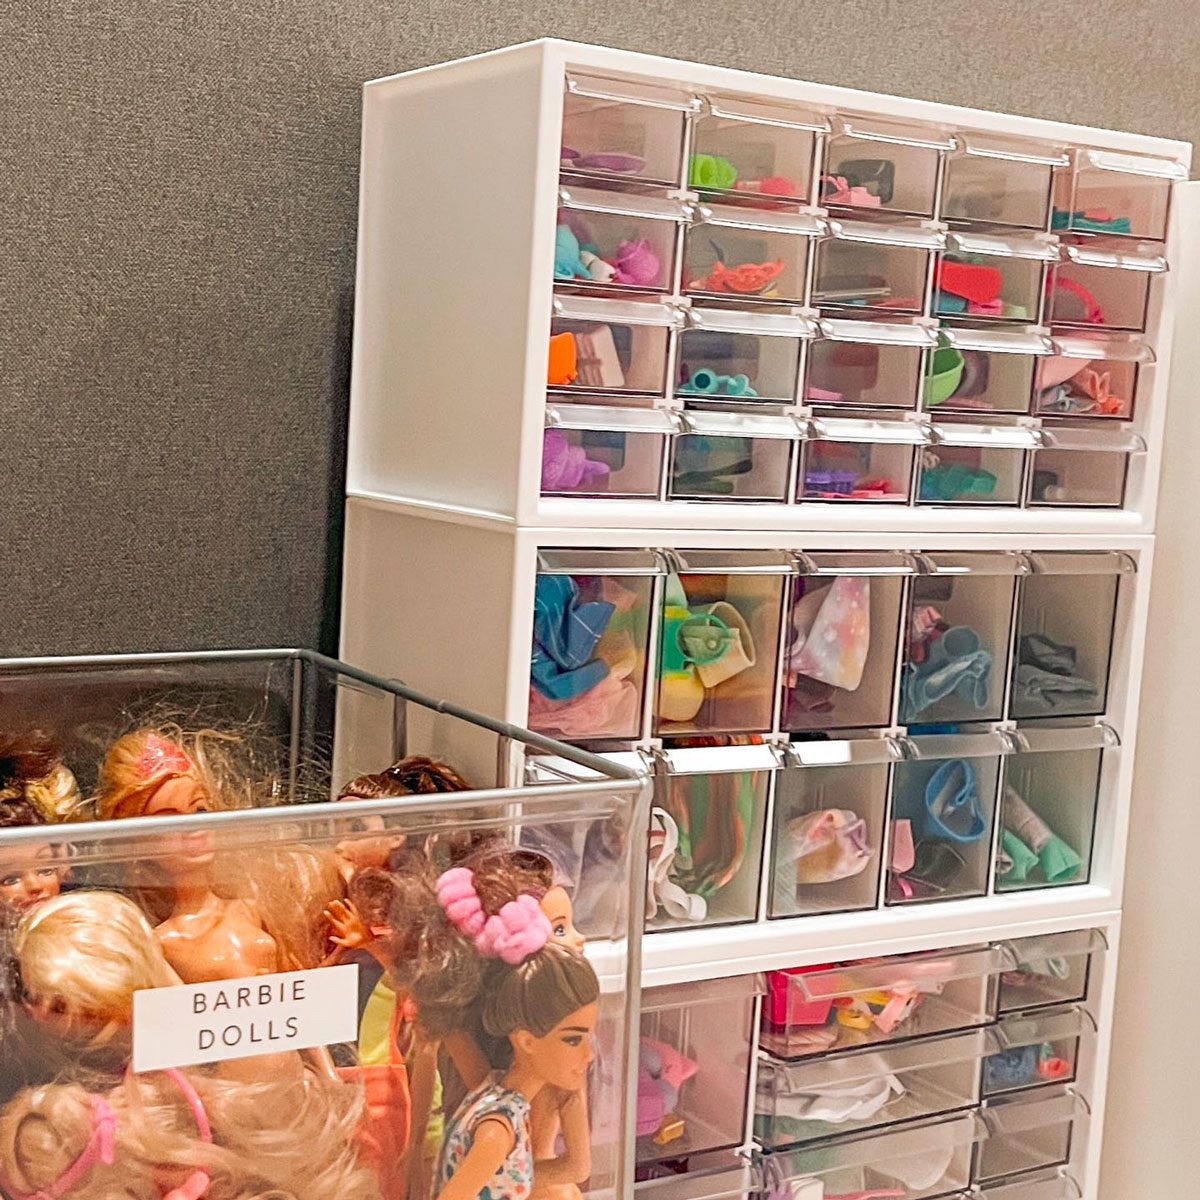 Realistic Barbie Storage Ideas That Will Tame the Doll Mess